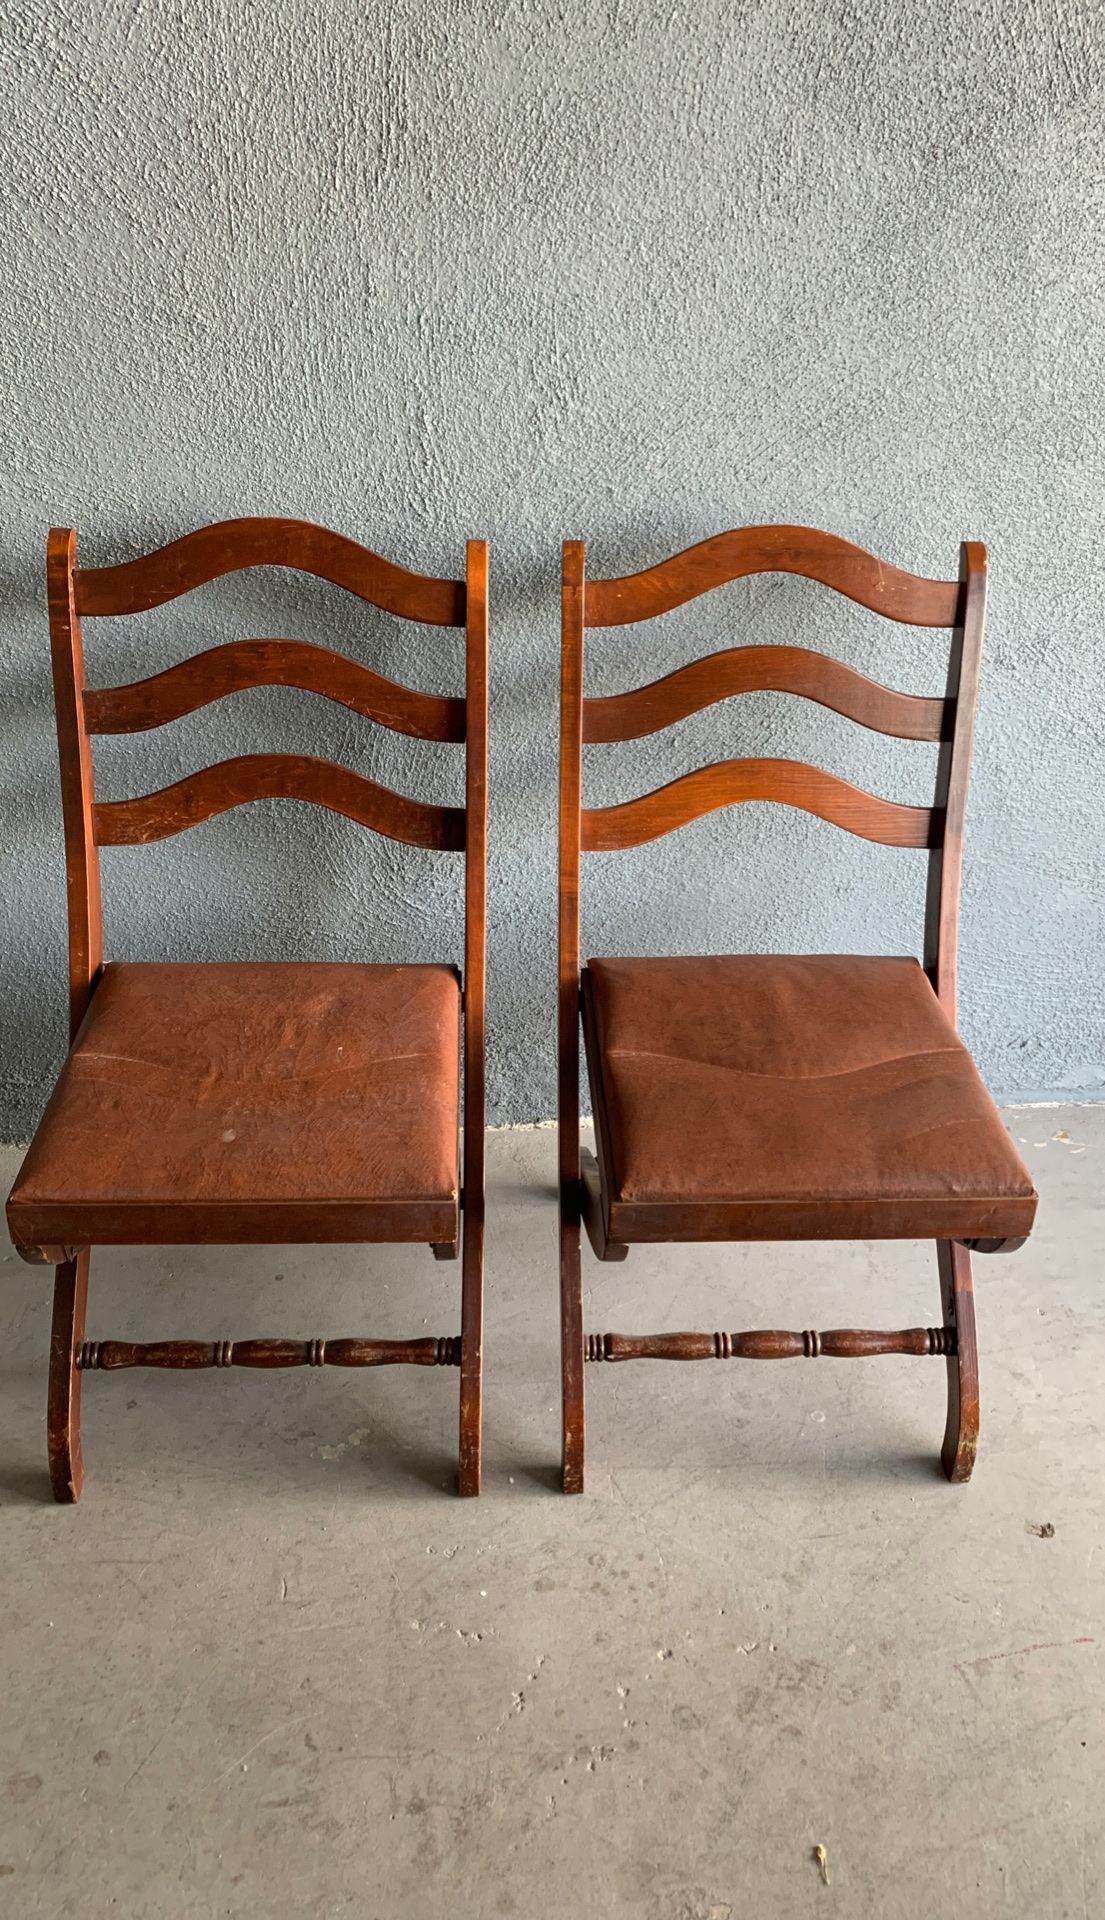 Two wooden antique folding chairs